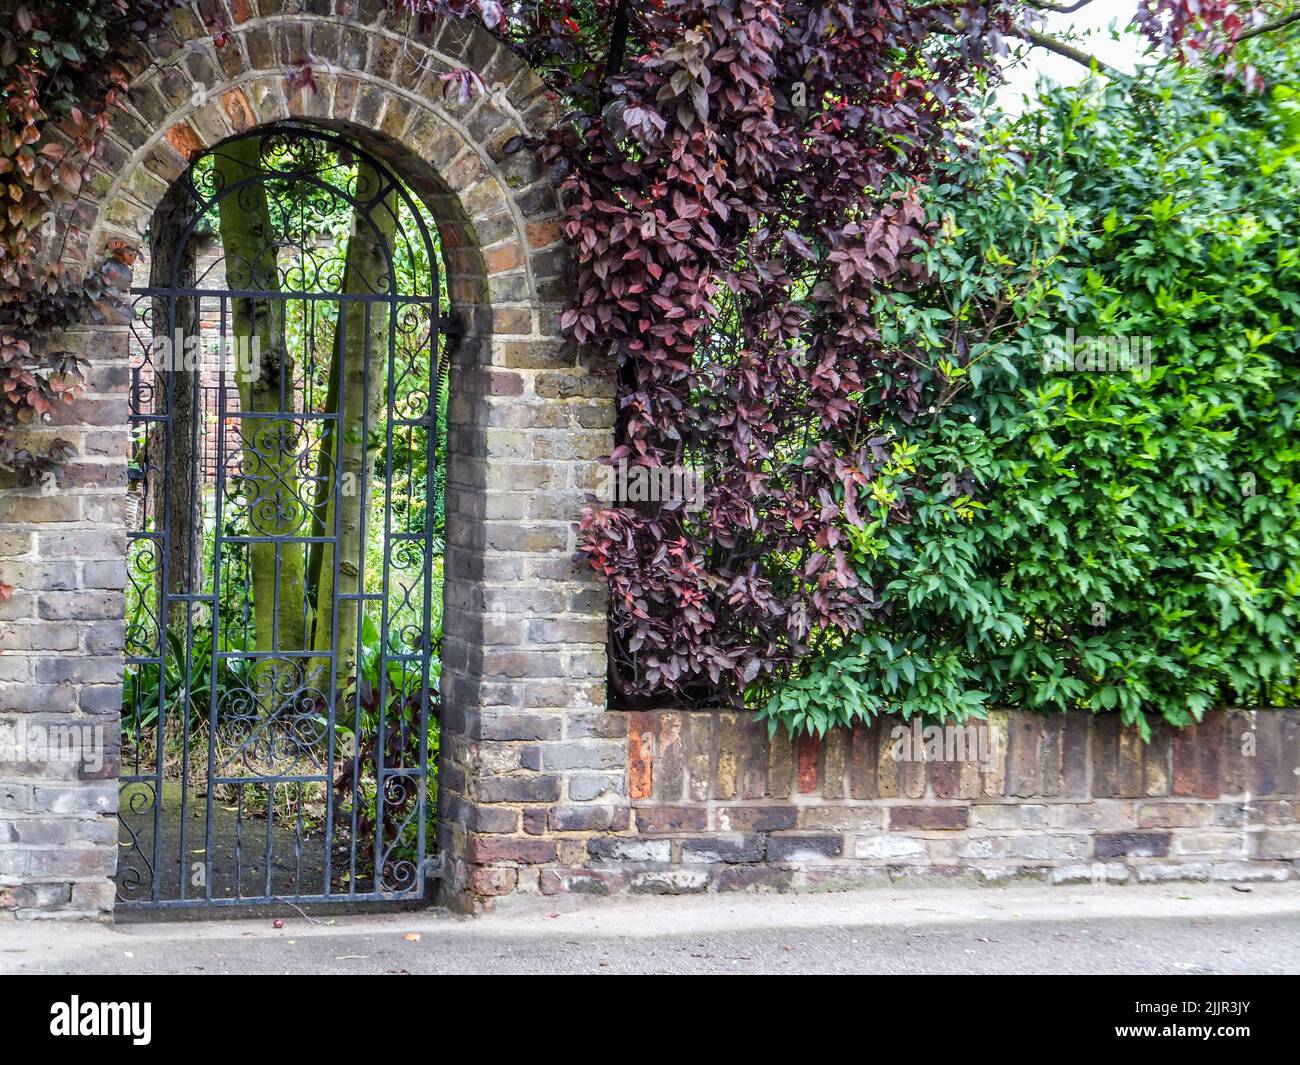 An arched wrought iron gate provides entry to a private garden in Harmondsworth, Hillingdon, Middlesex, London, England, UK. Stock Photo